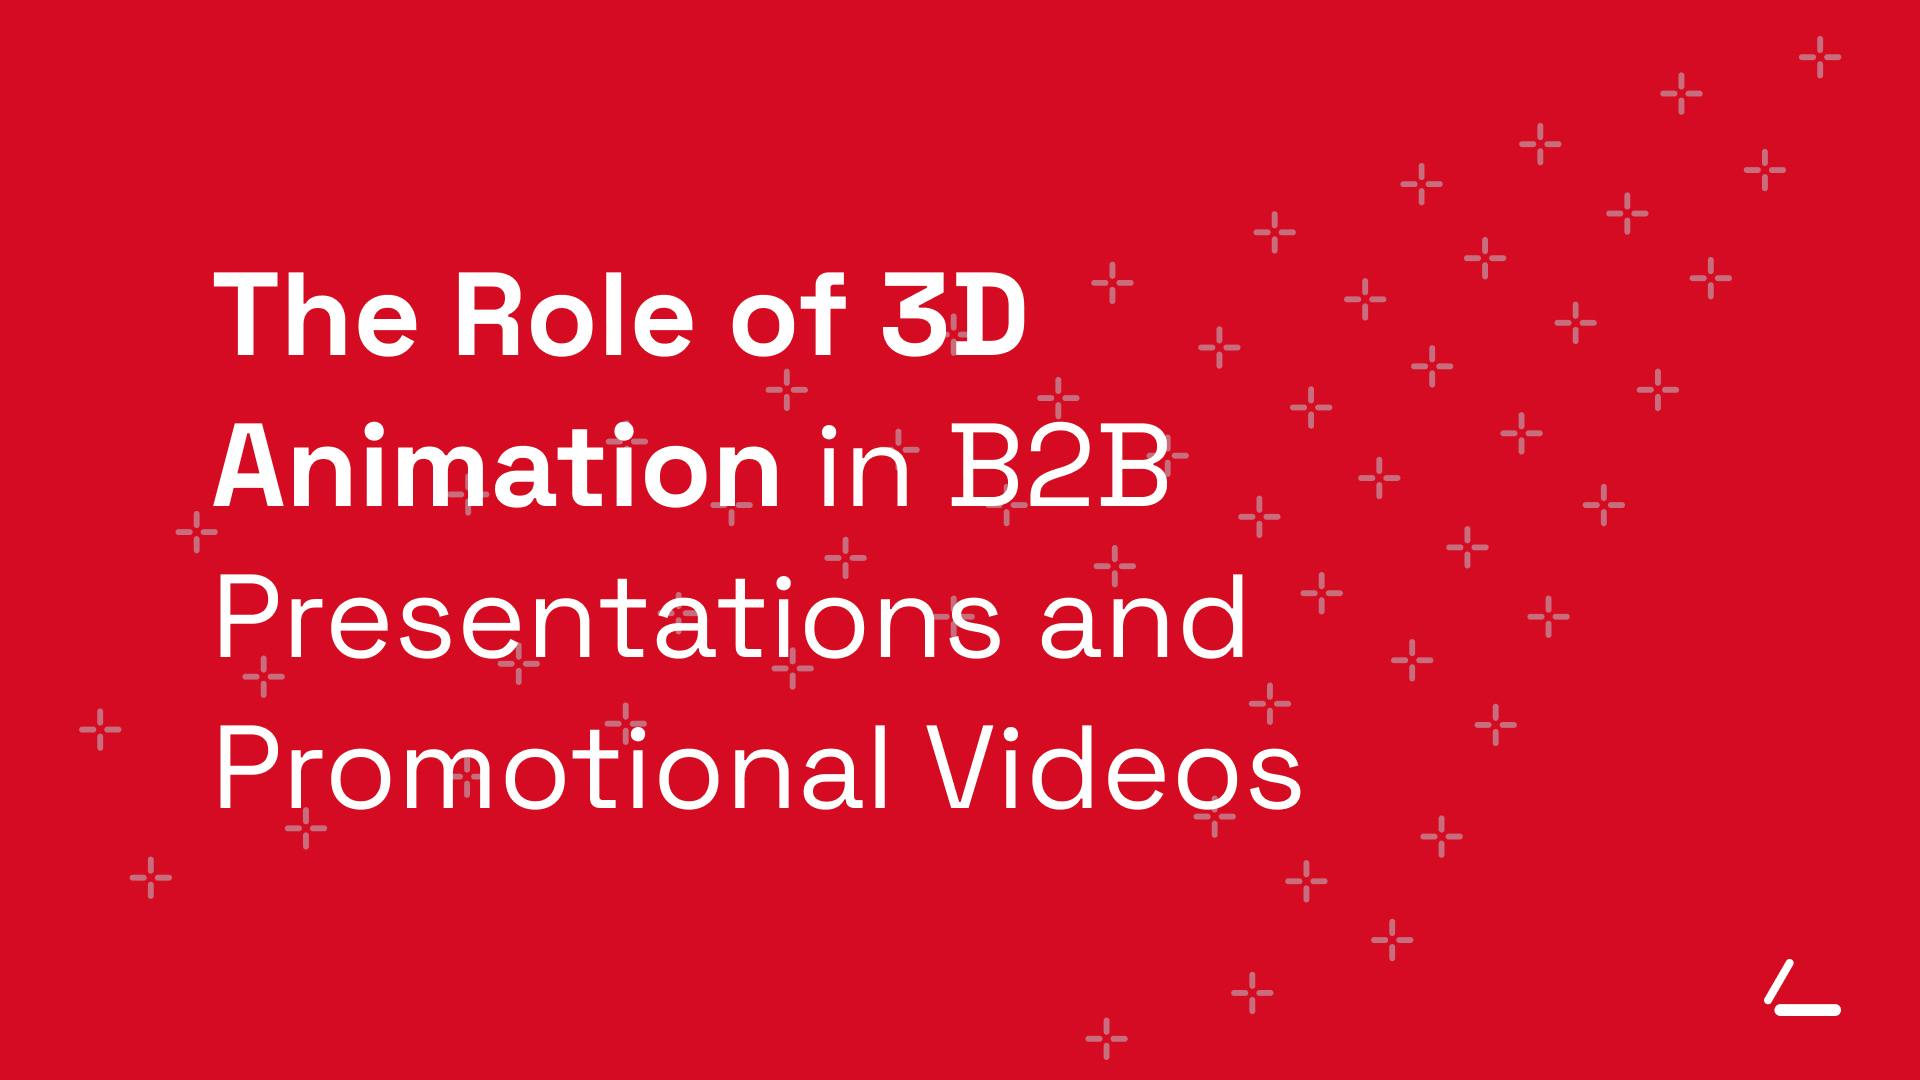 SEO Article Header - Red background with text about the role of 3D animation